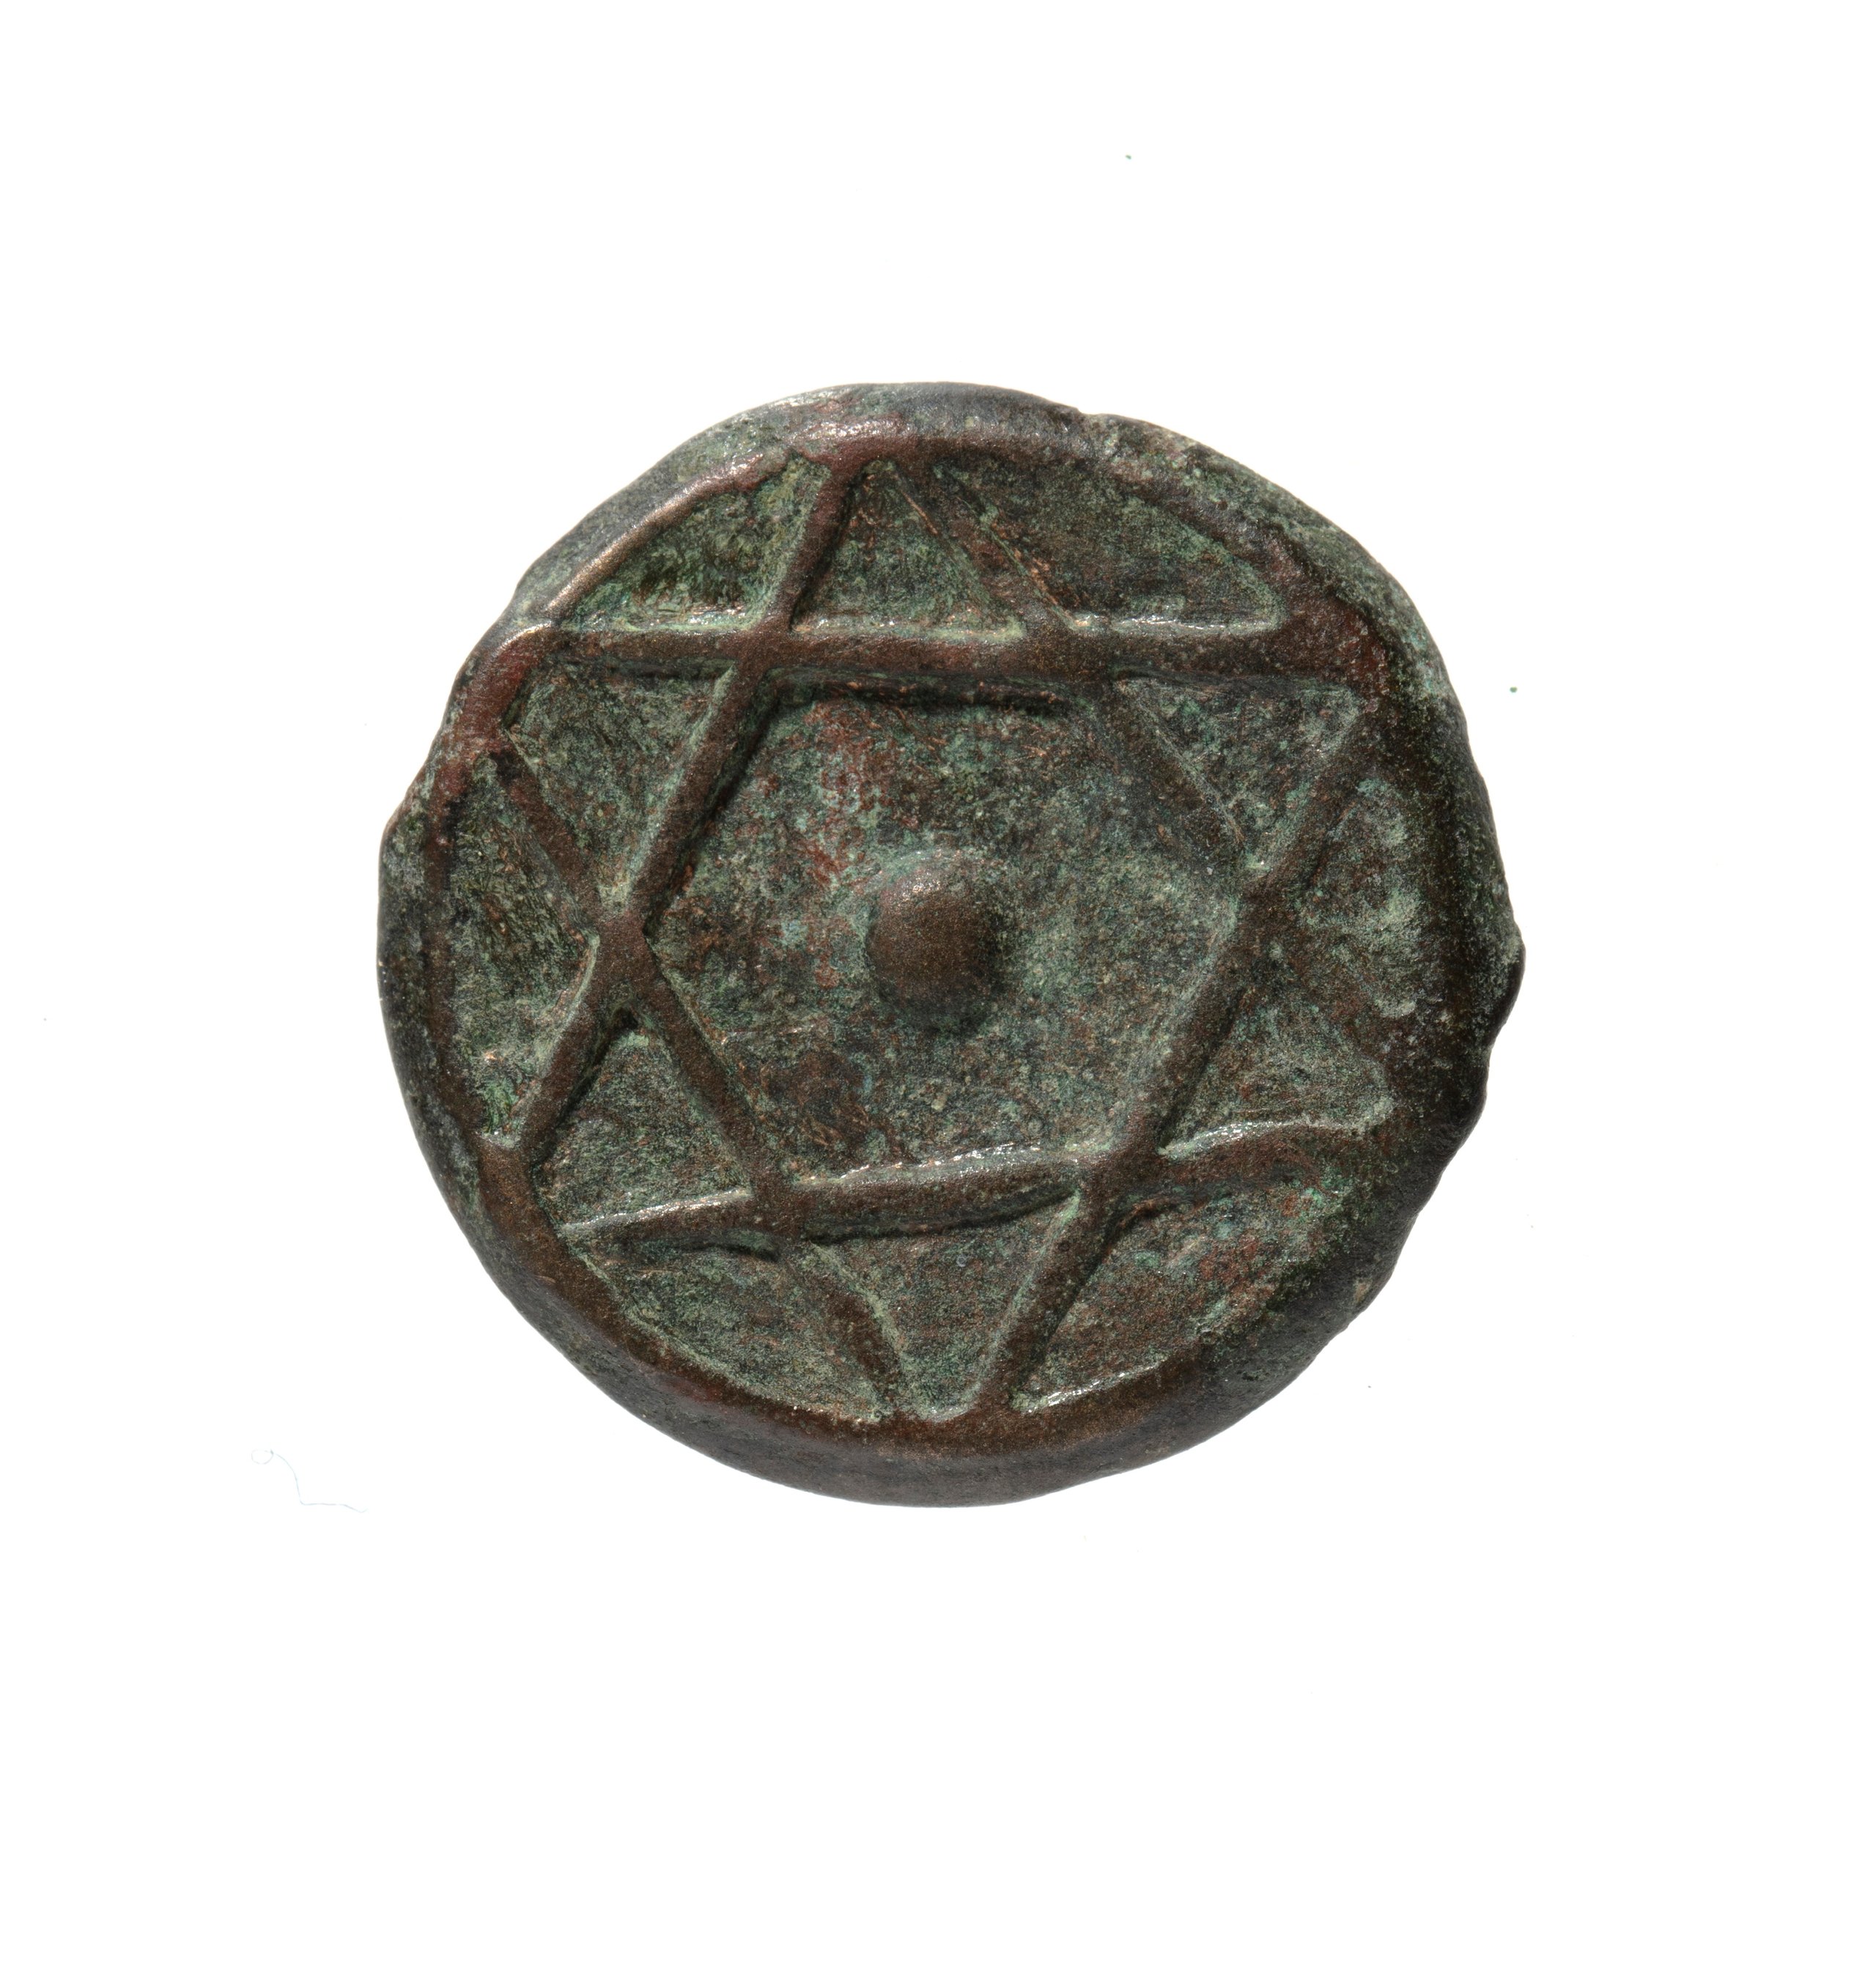 Moroccan One Falus coin